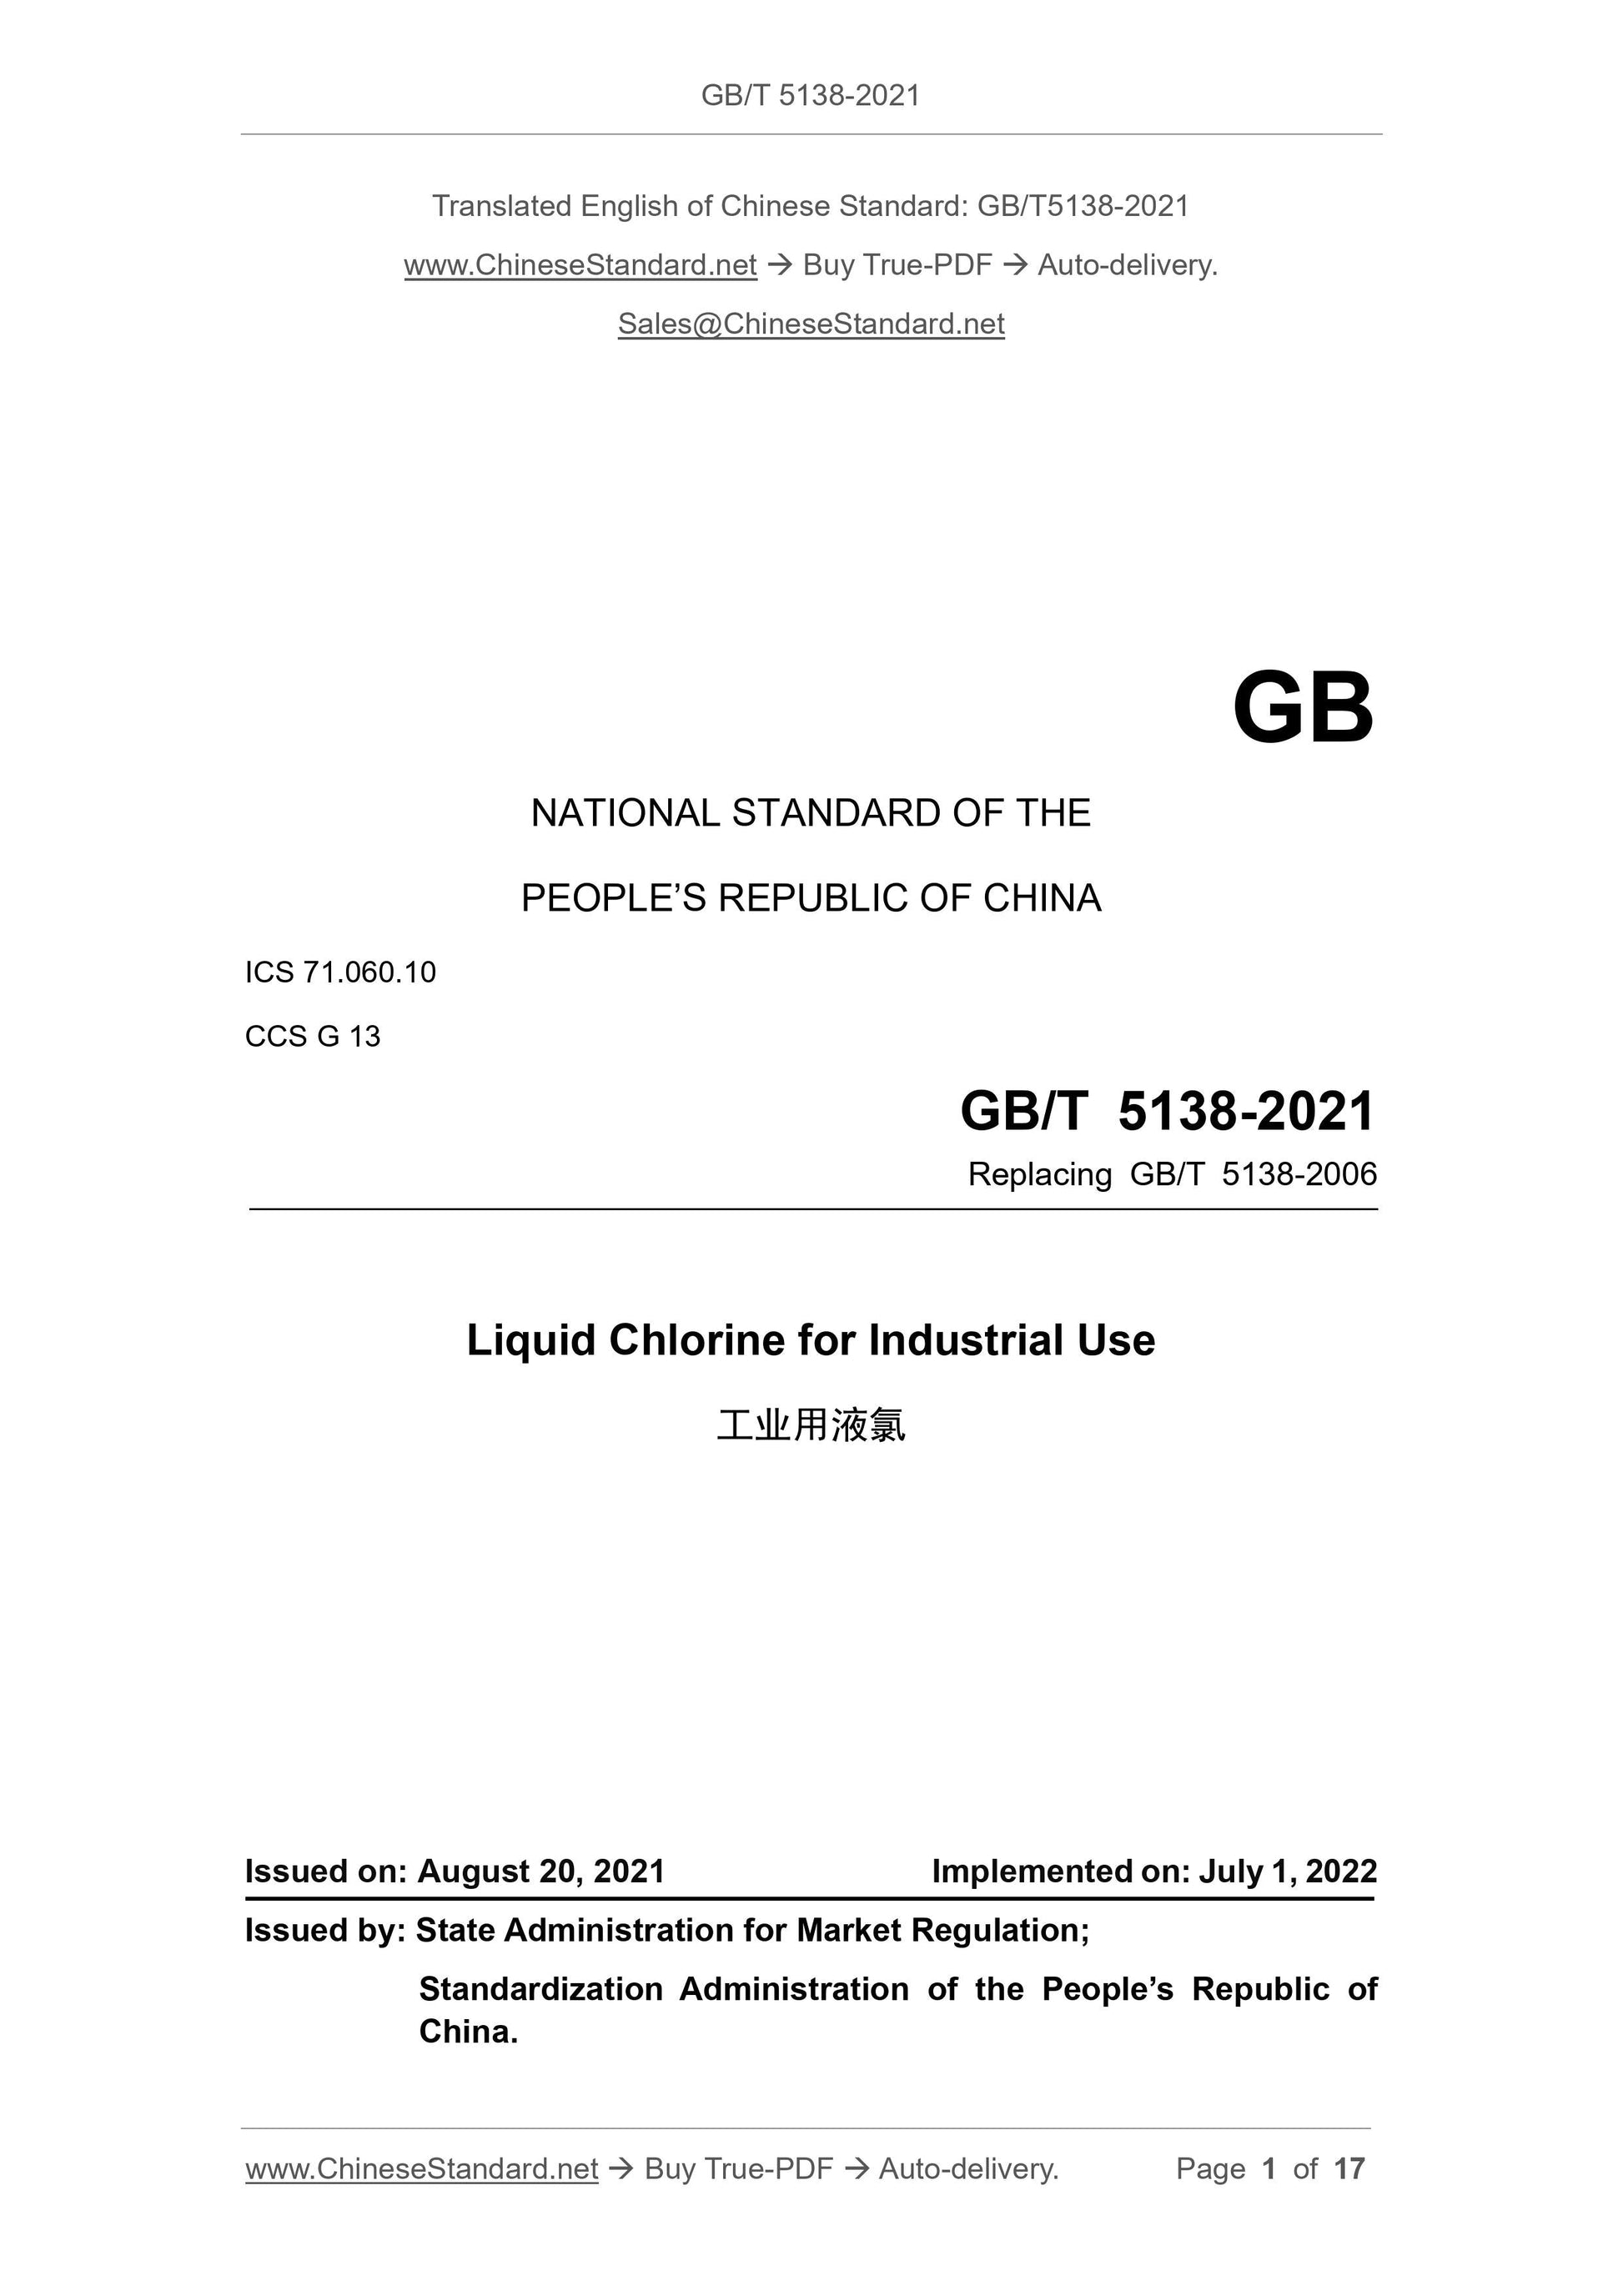 GB/T 5138-2021 Page 1